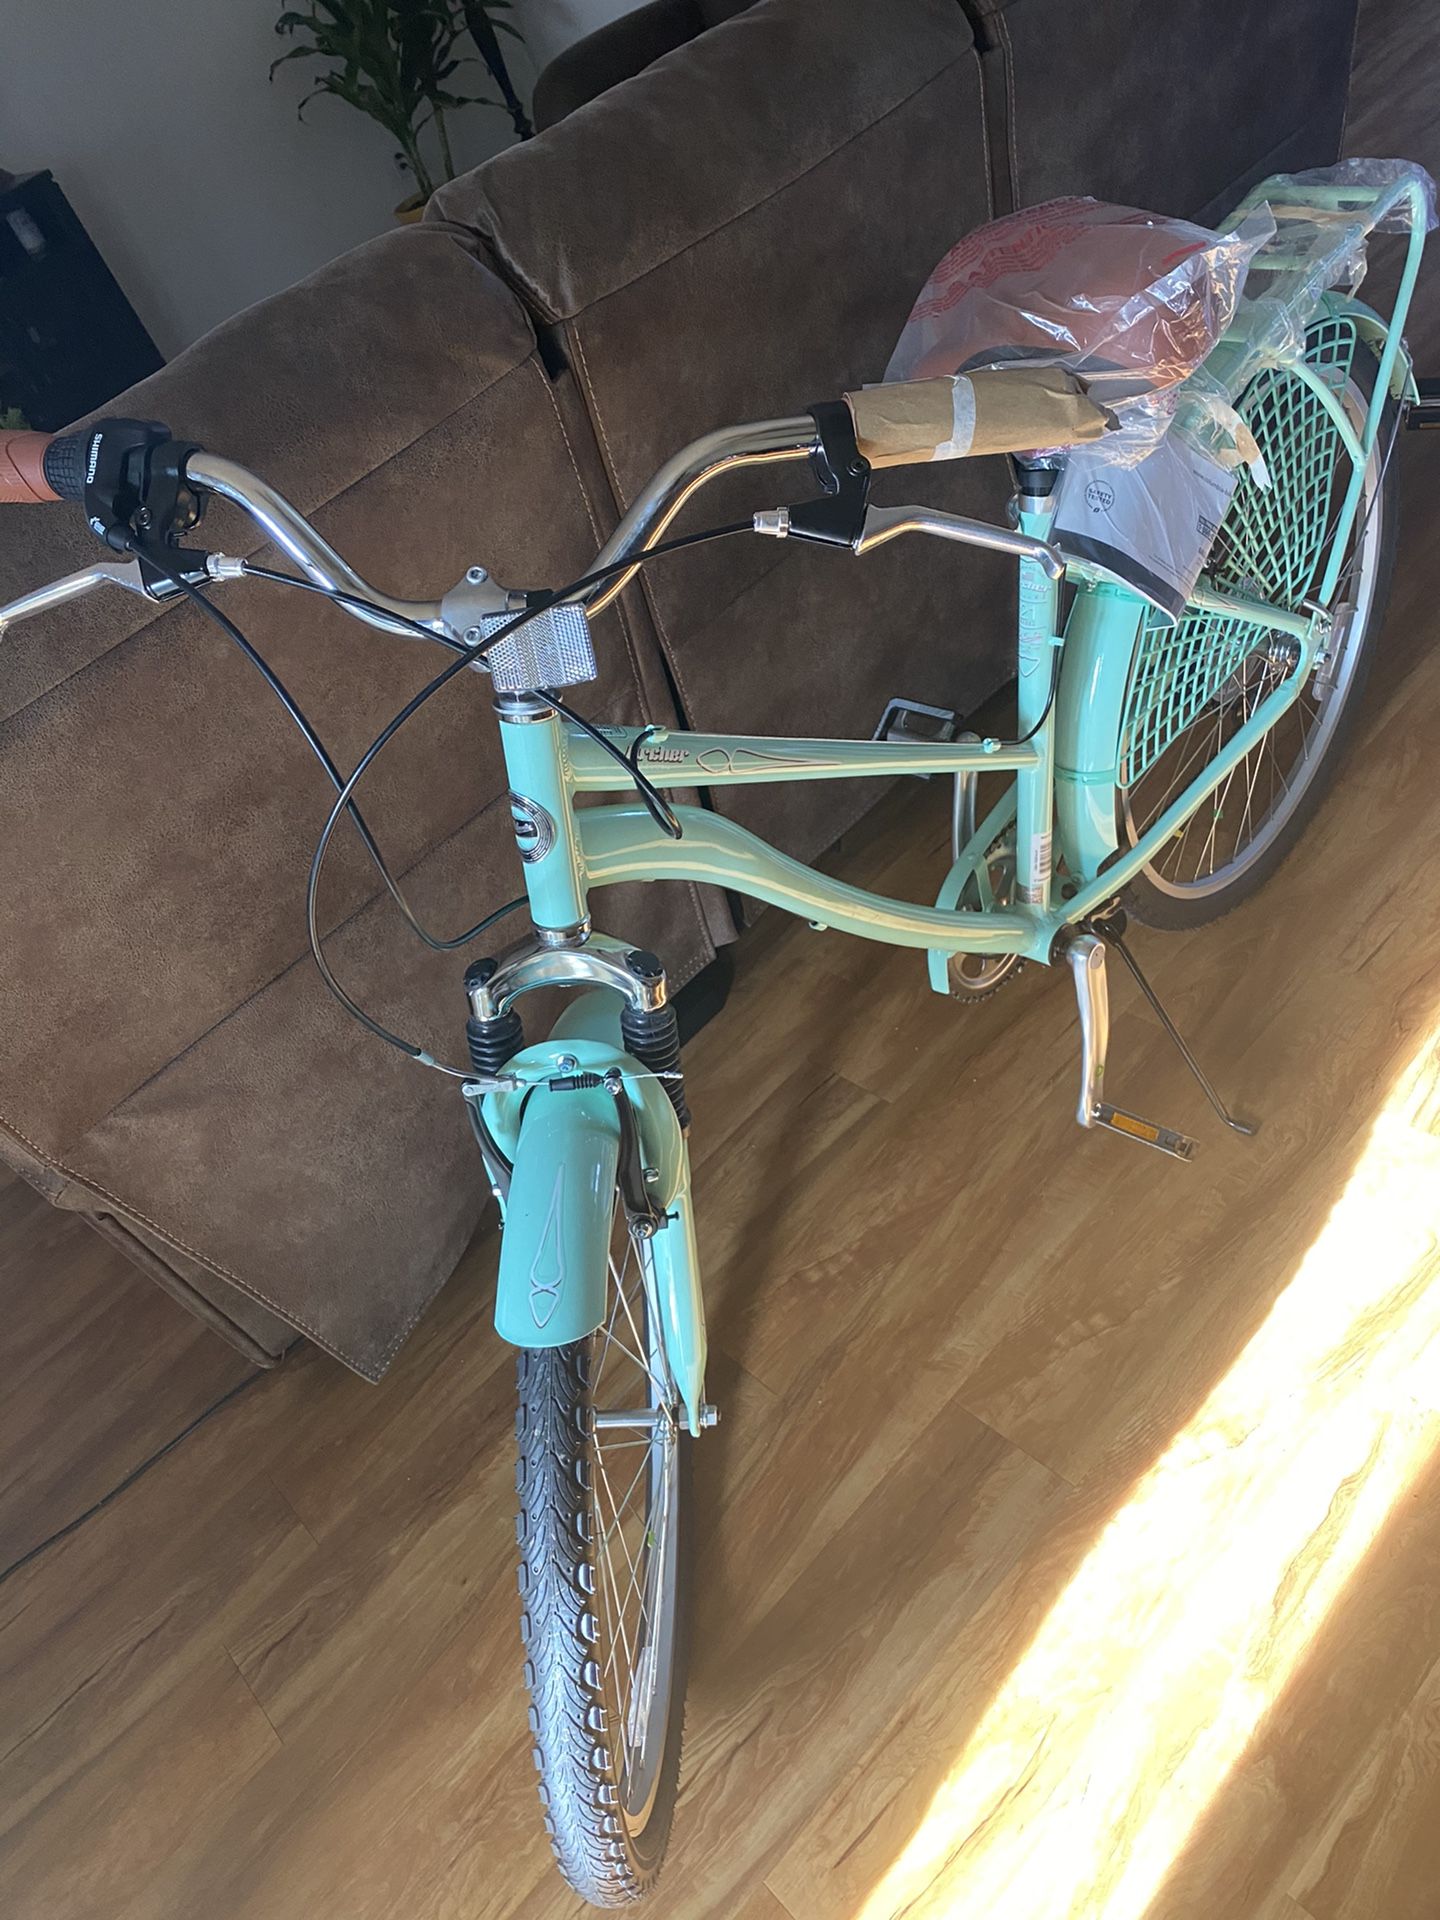 BRAND NEW 27” 7 SPEED COLUMBIA BEACH CRUISER PERFECT FOR THE SUMMER, READY TO RIDE!